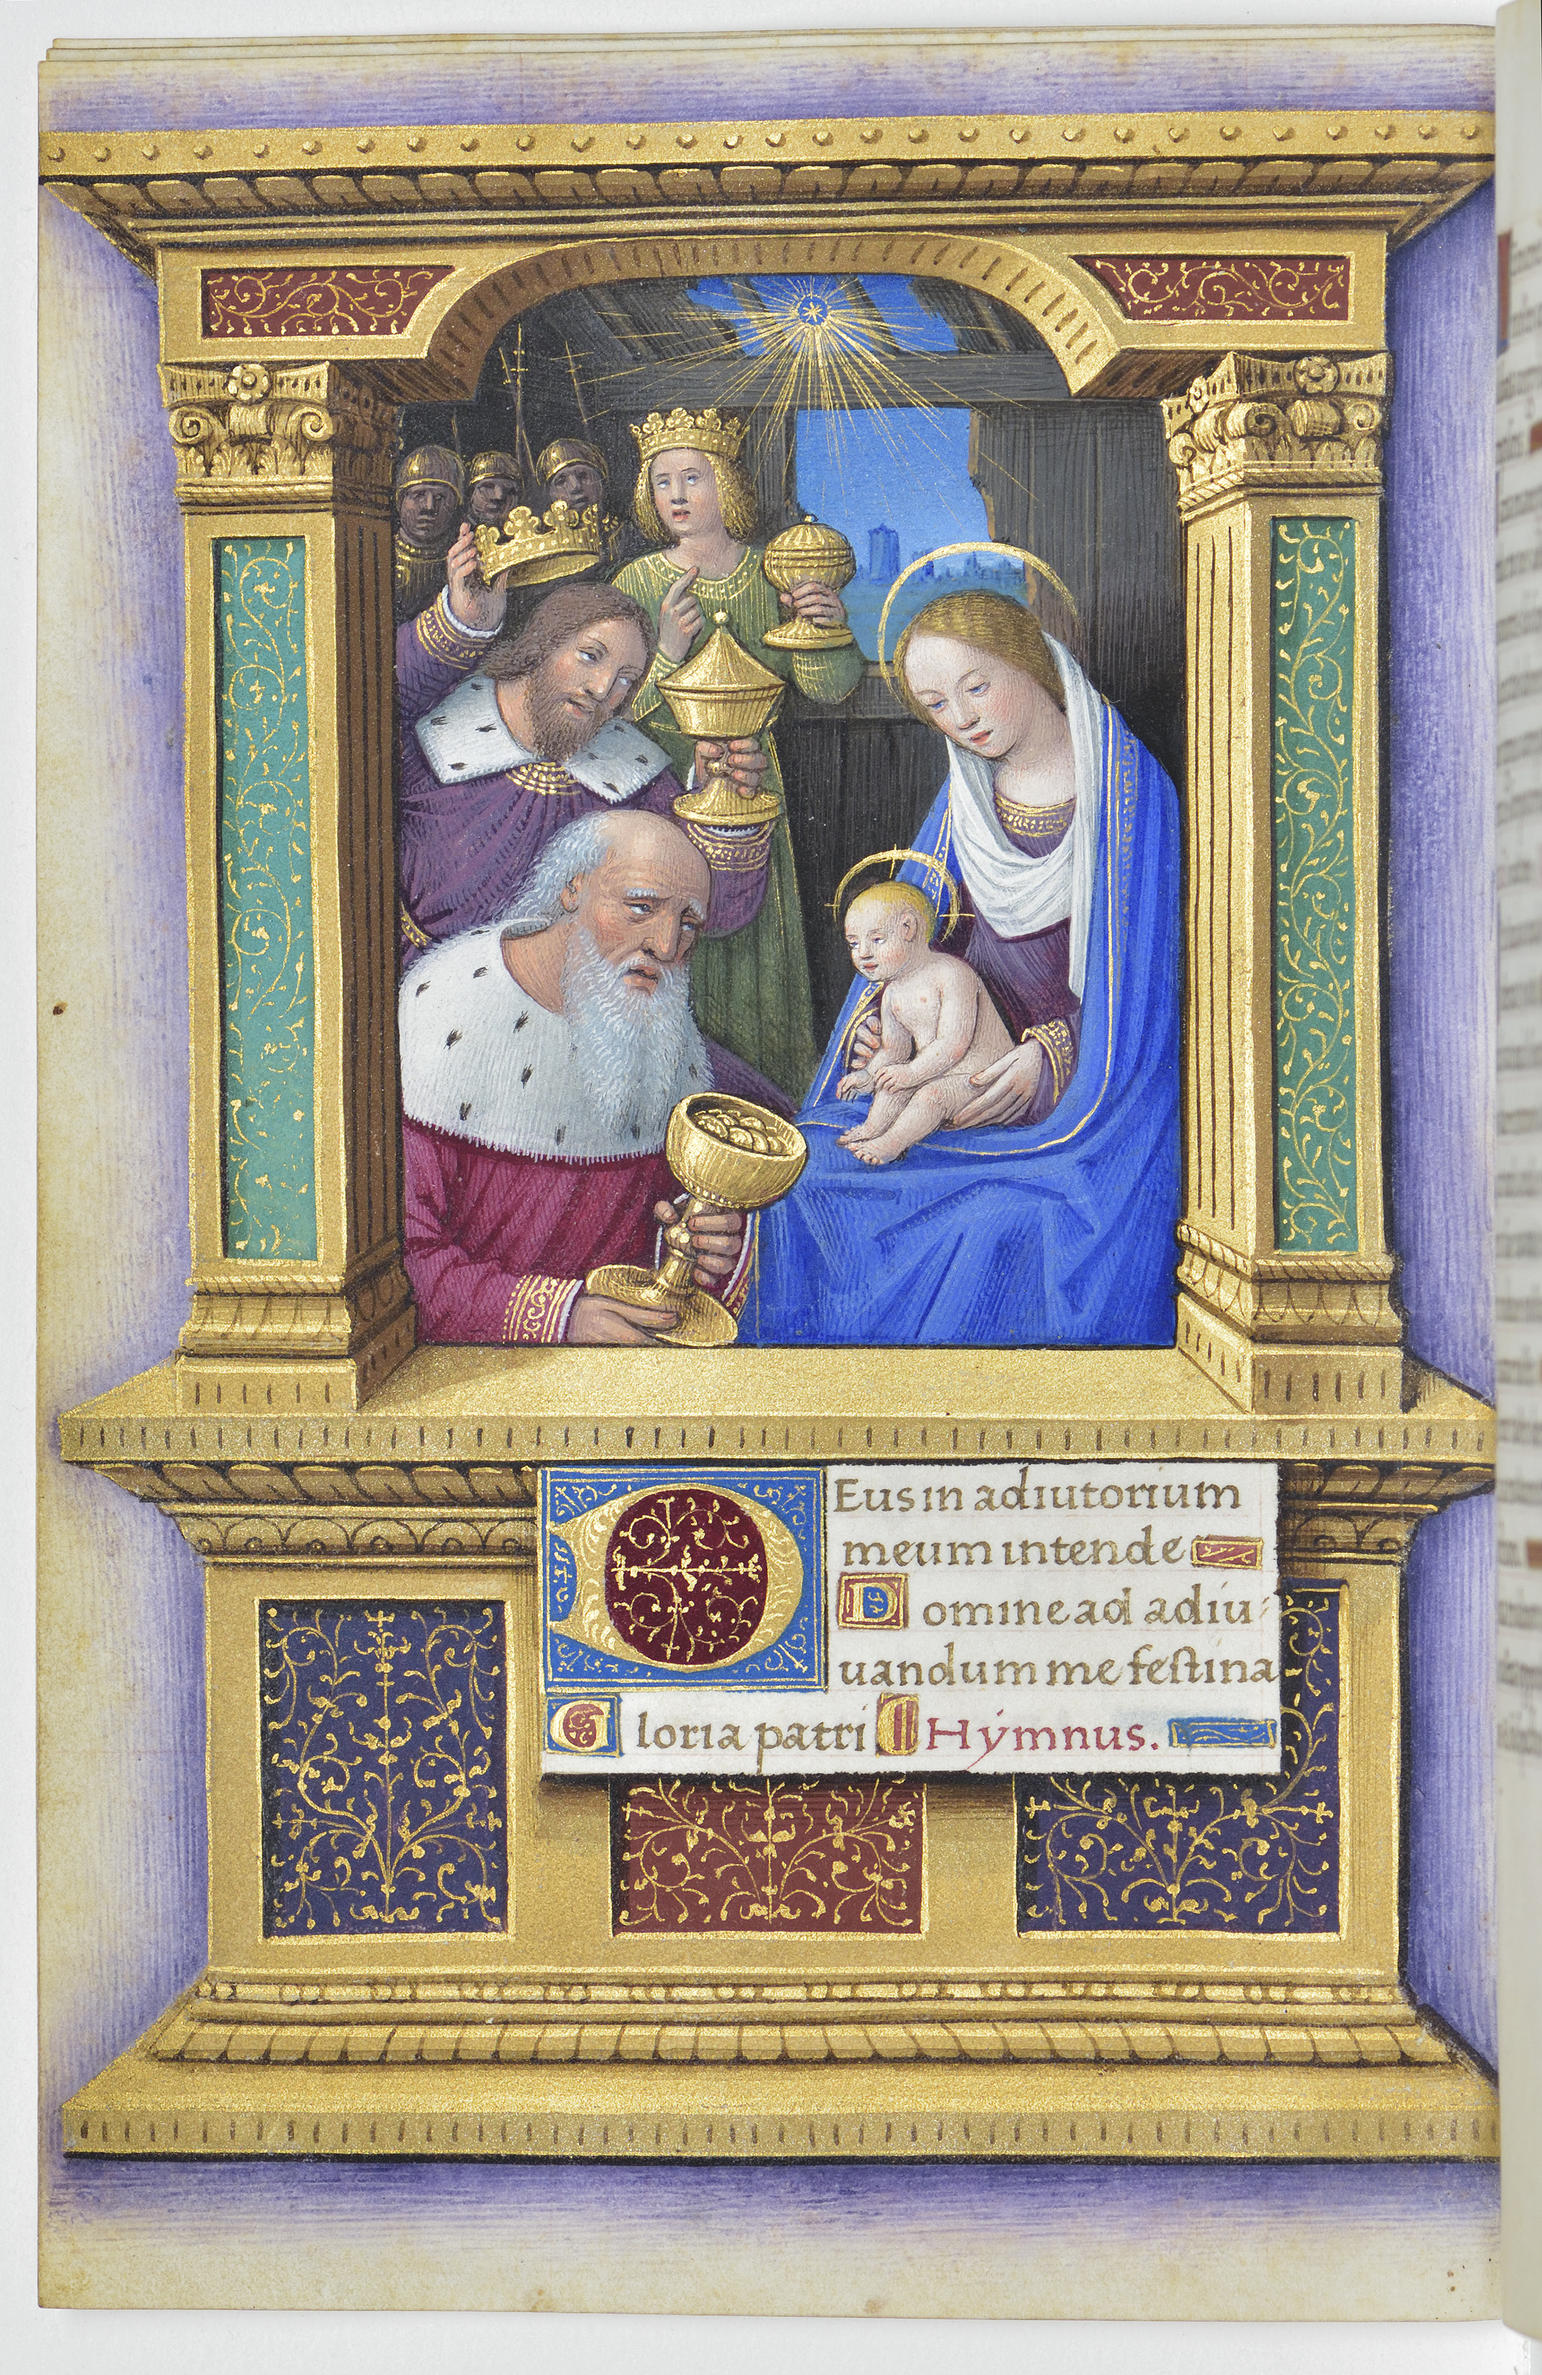 Jean Bourdichon (French, 1490-1515, illuminator), Book of Hours: The Adoration of the Magi, 1490-1515.